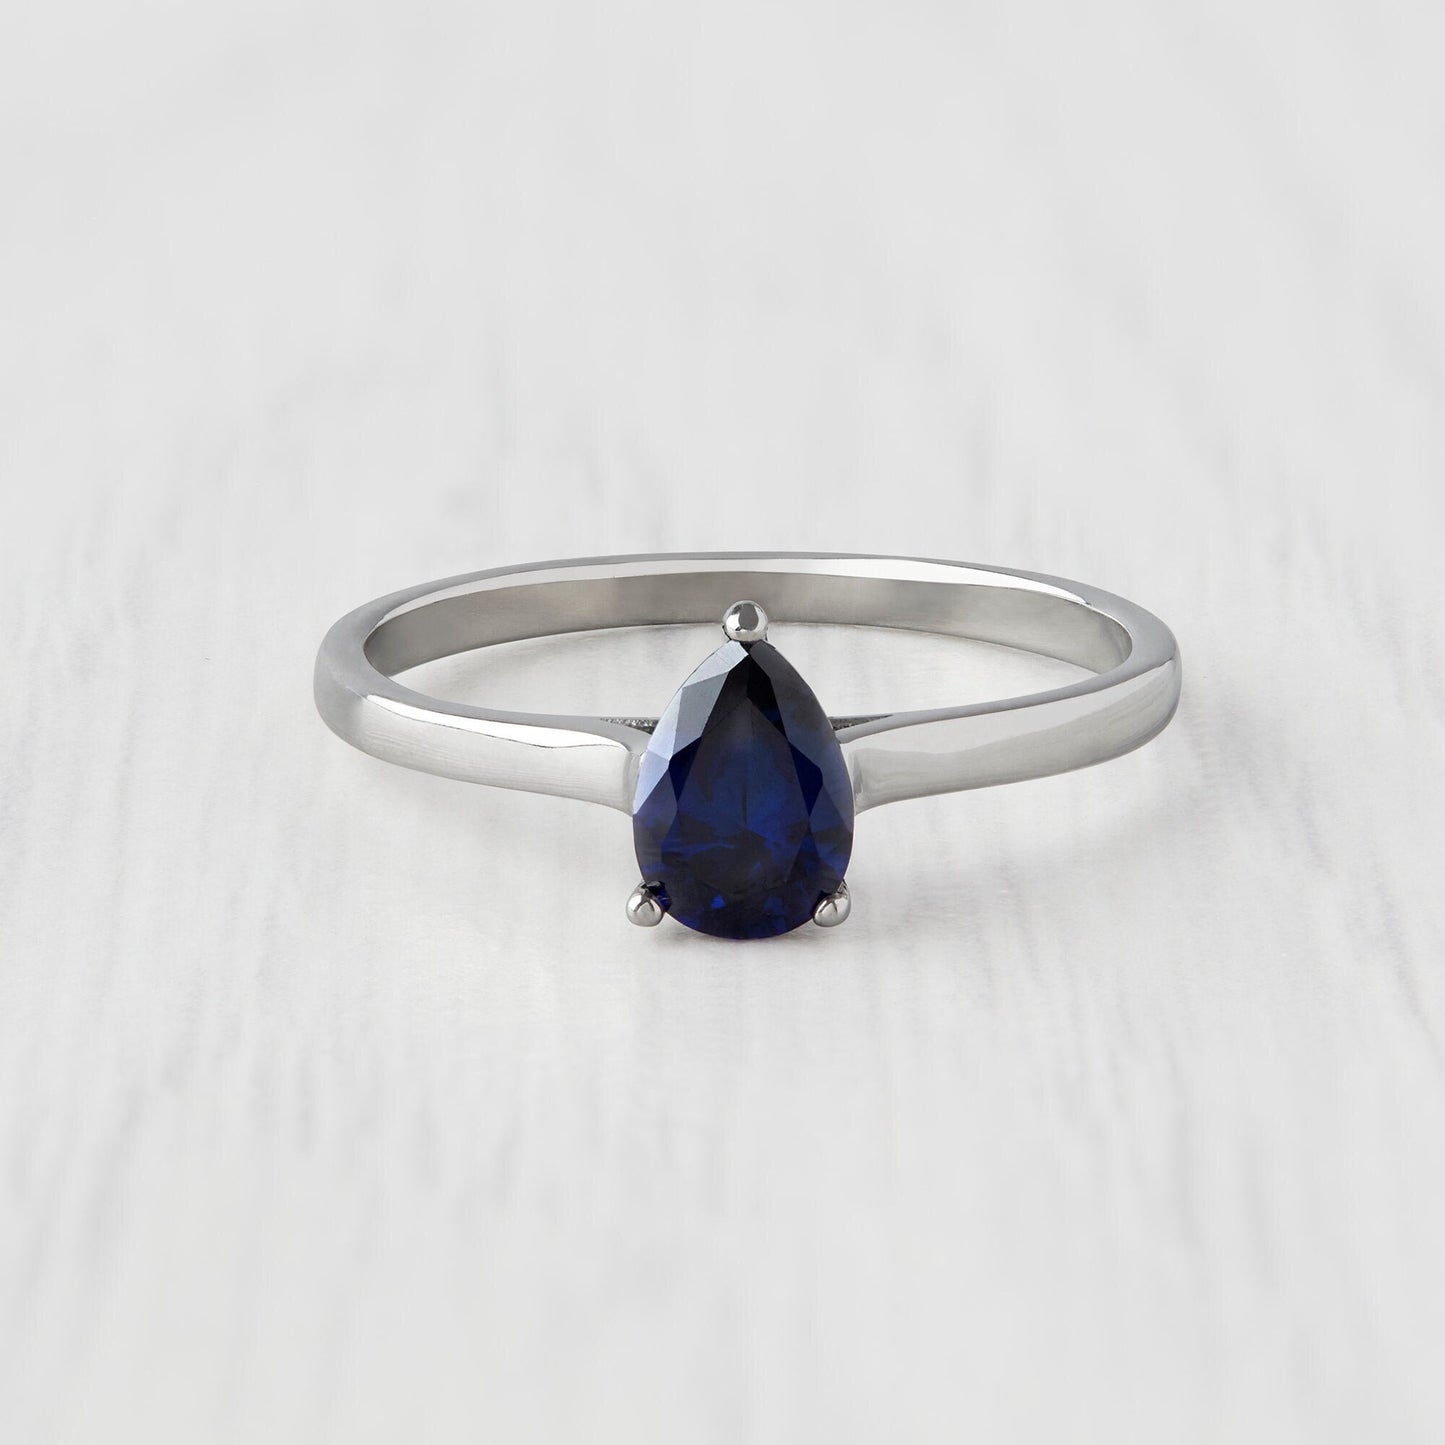 0.7ct Pear Cut Lab Blue Sapphire Solitaire cathedral ring in Titanium or White Gold